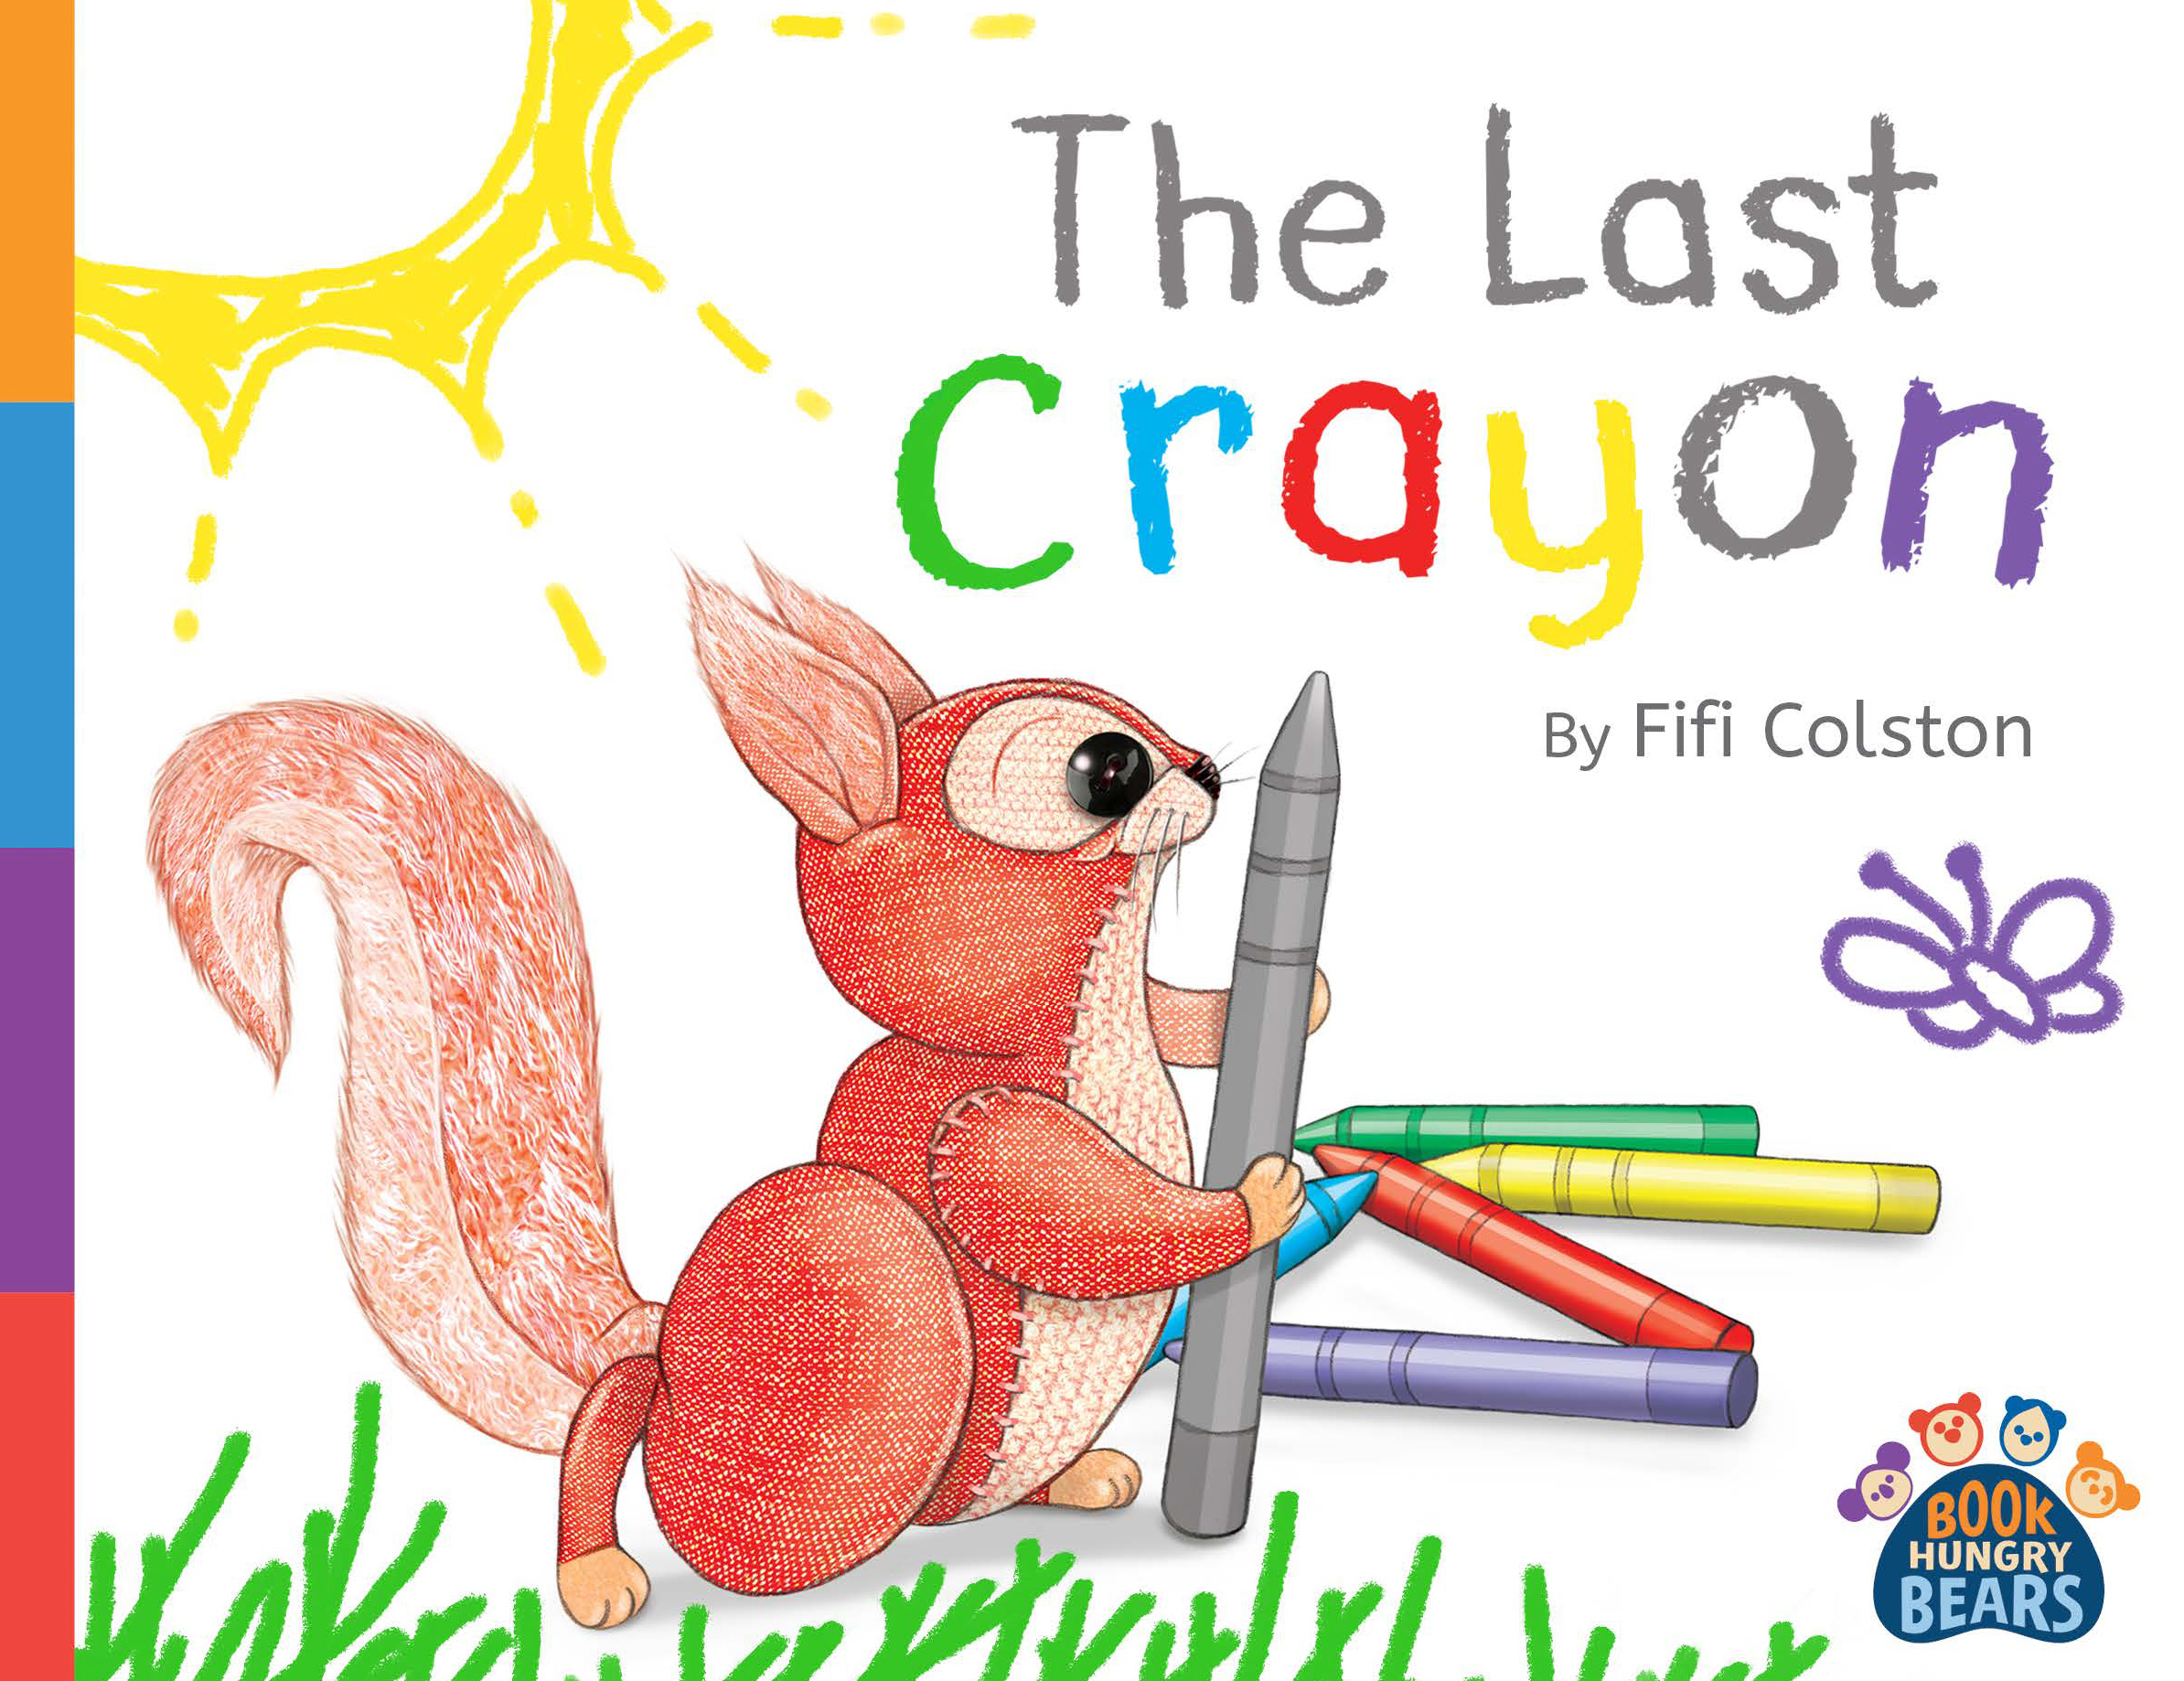 Last Crayon-cover: Image of the cover of the book “The Last Crayon”.